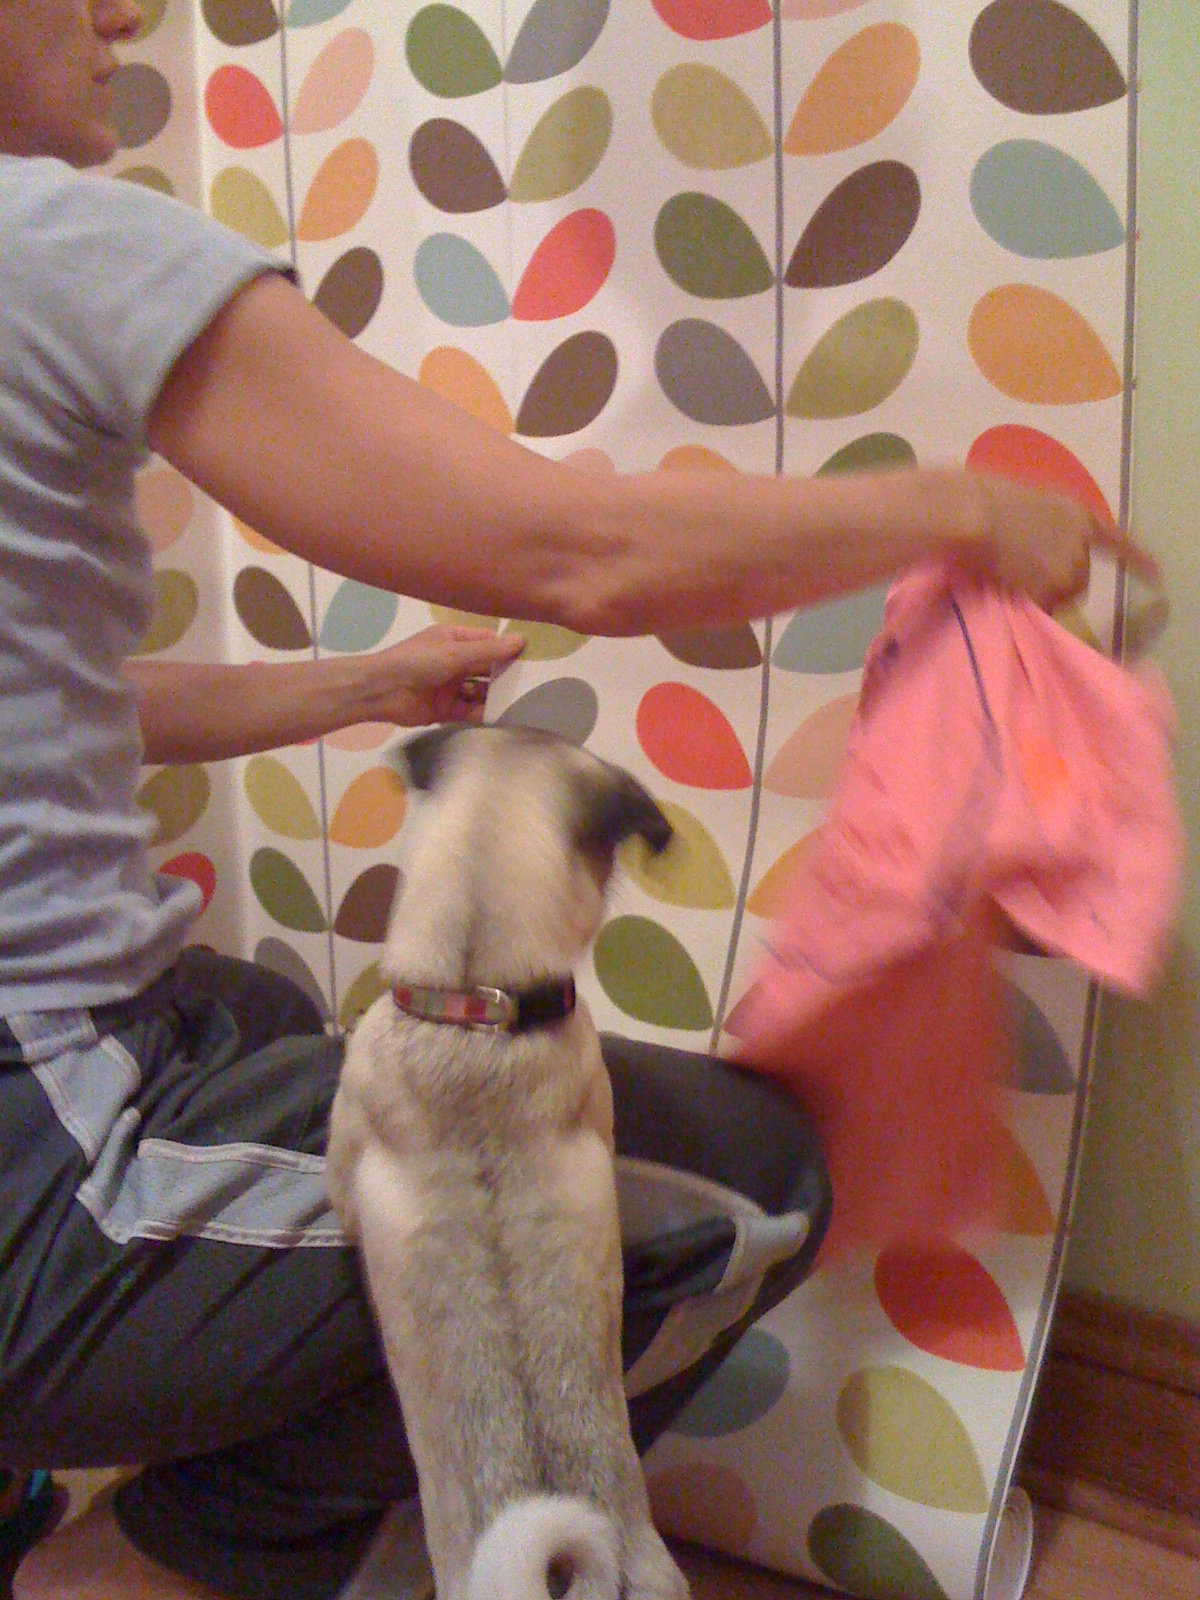 Olive tried to get into the action too - but she eventually got bored ...